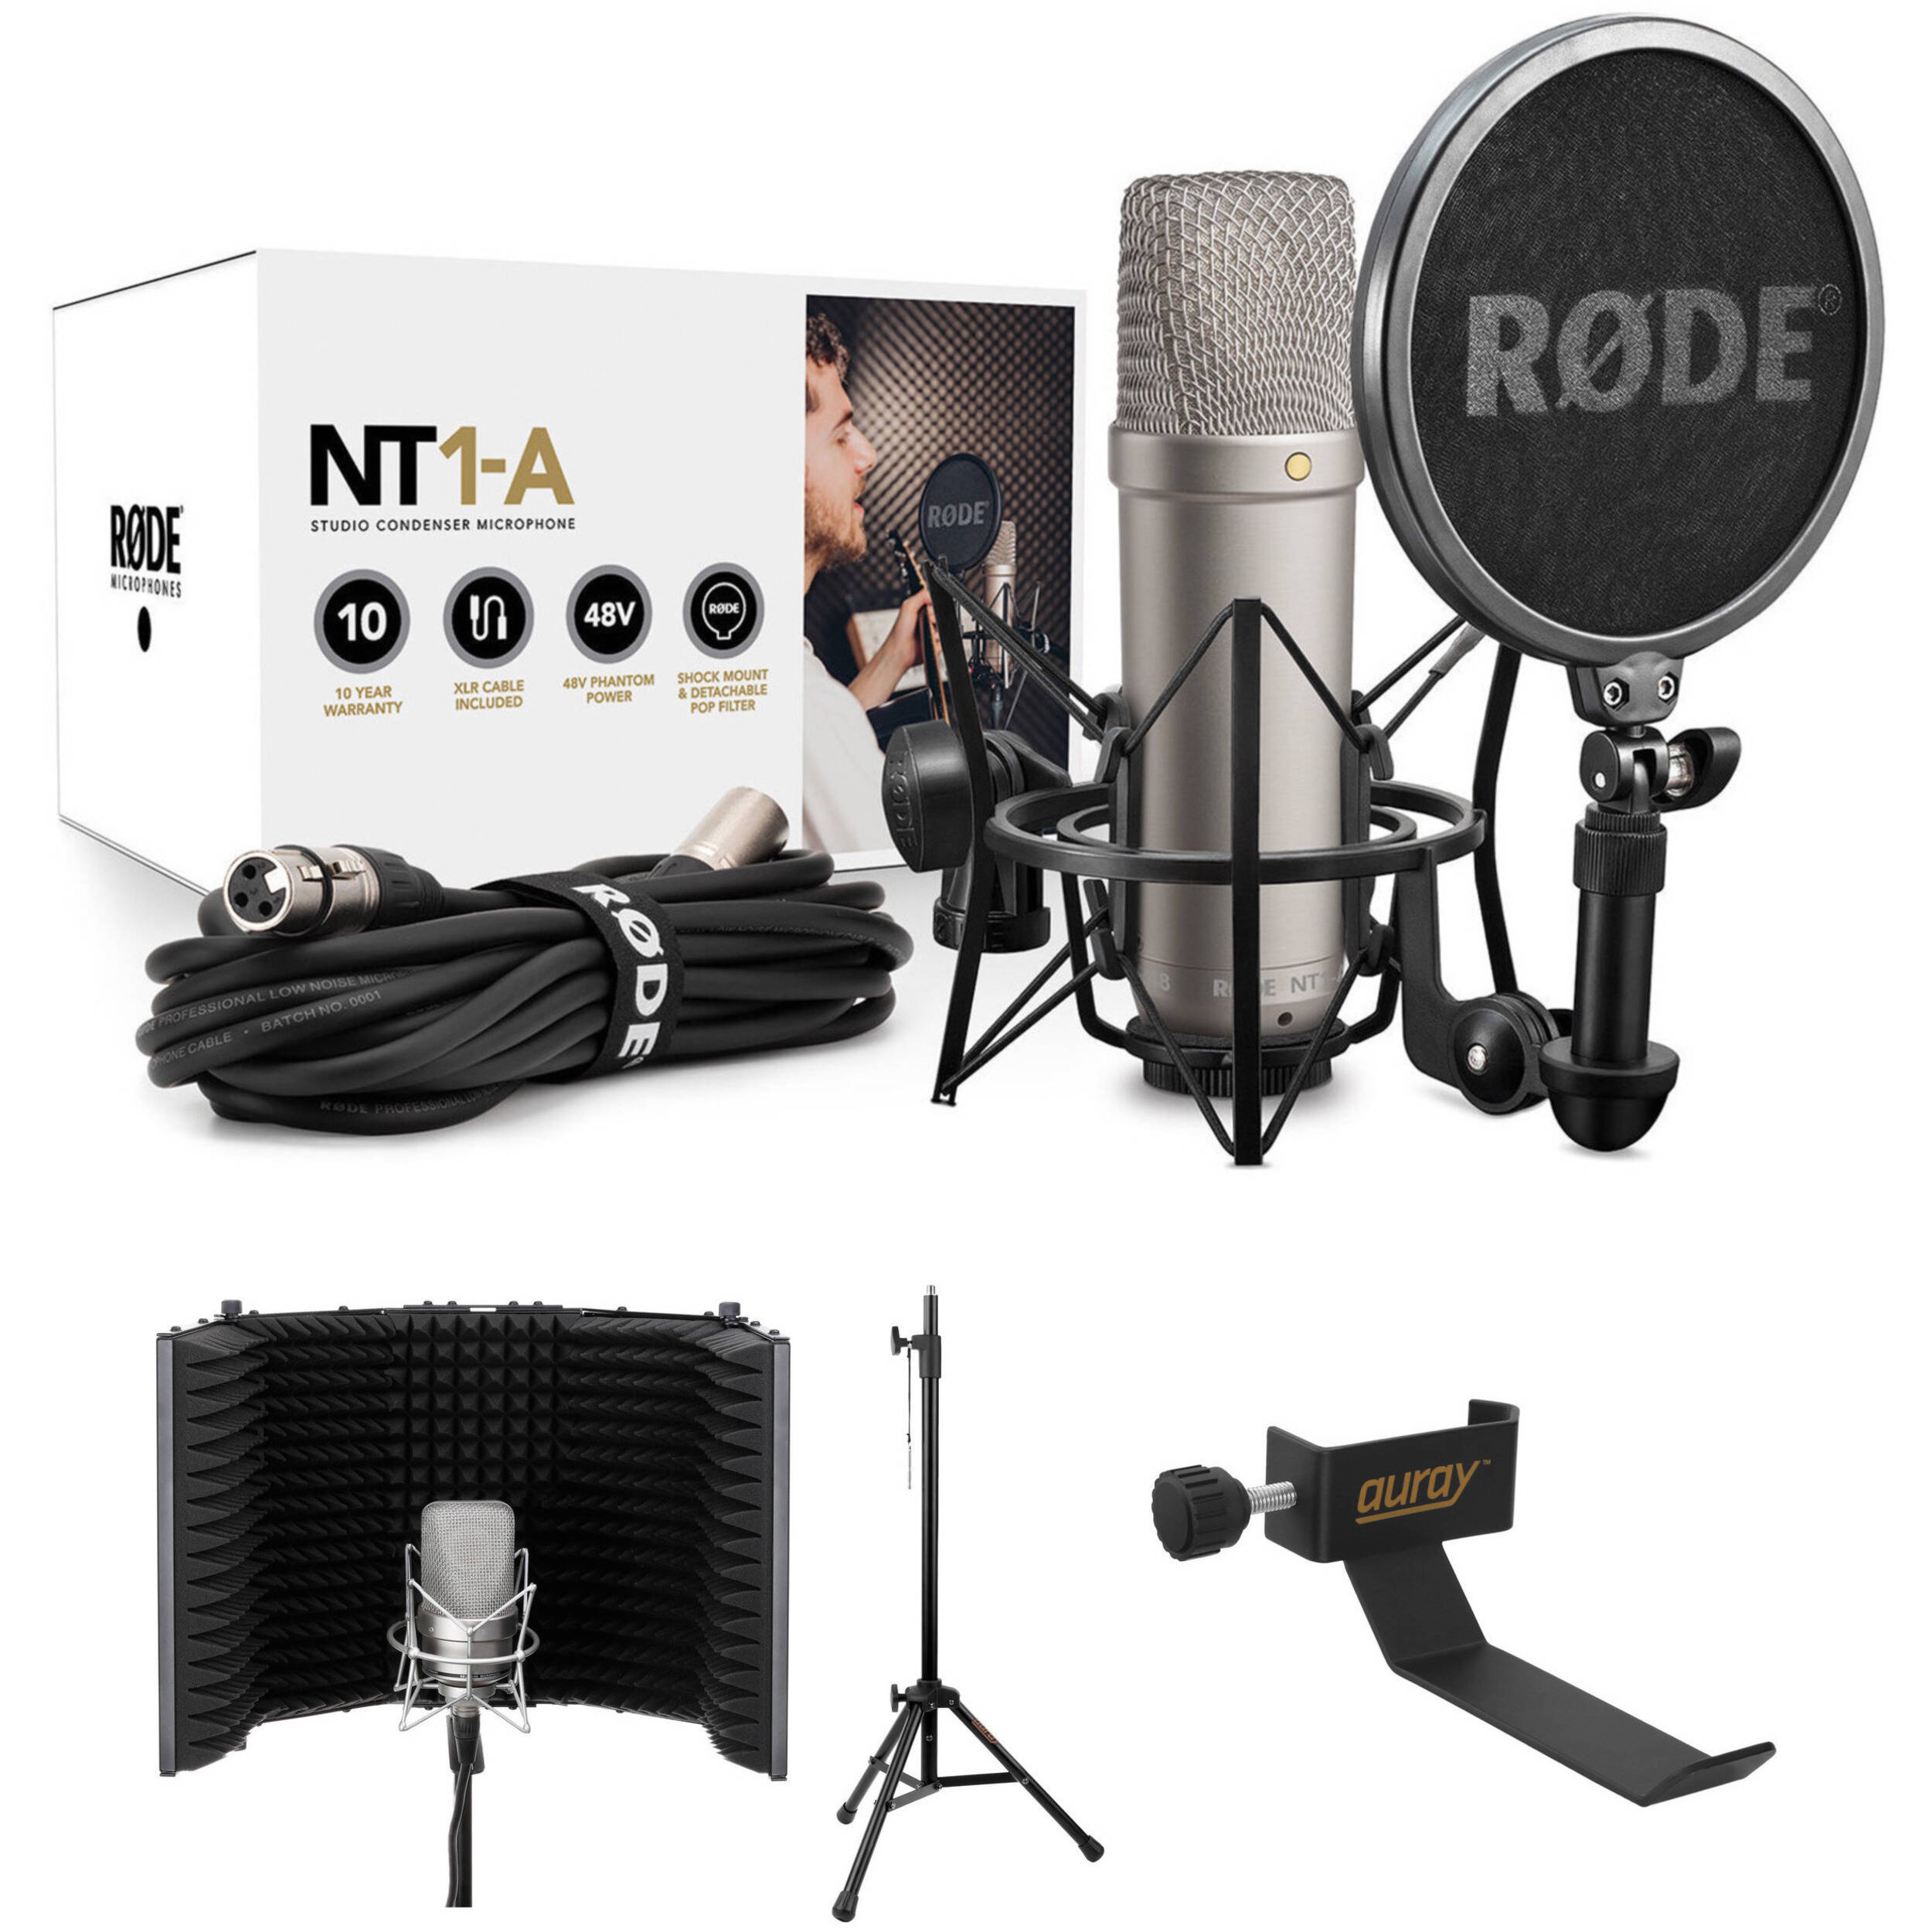 Audio-Technica AT2020 Studio Recording Bundle with Reflection Filter,  Stand, Pop Filter, XLR Cable, and Headphones